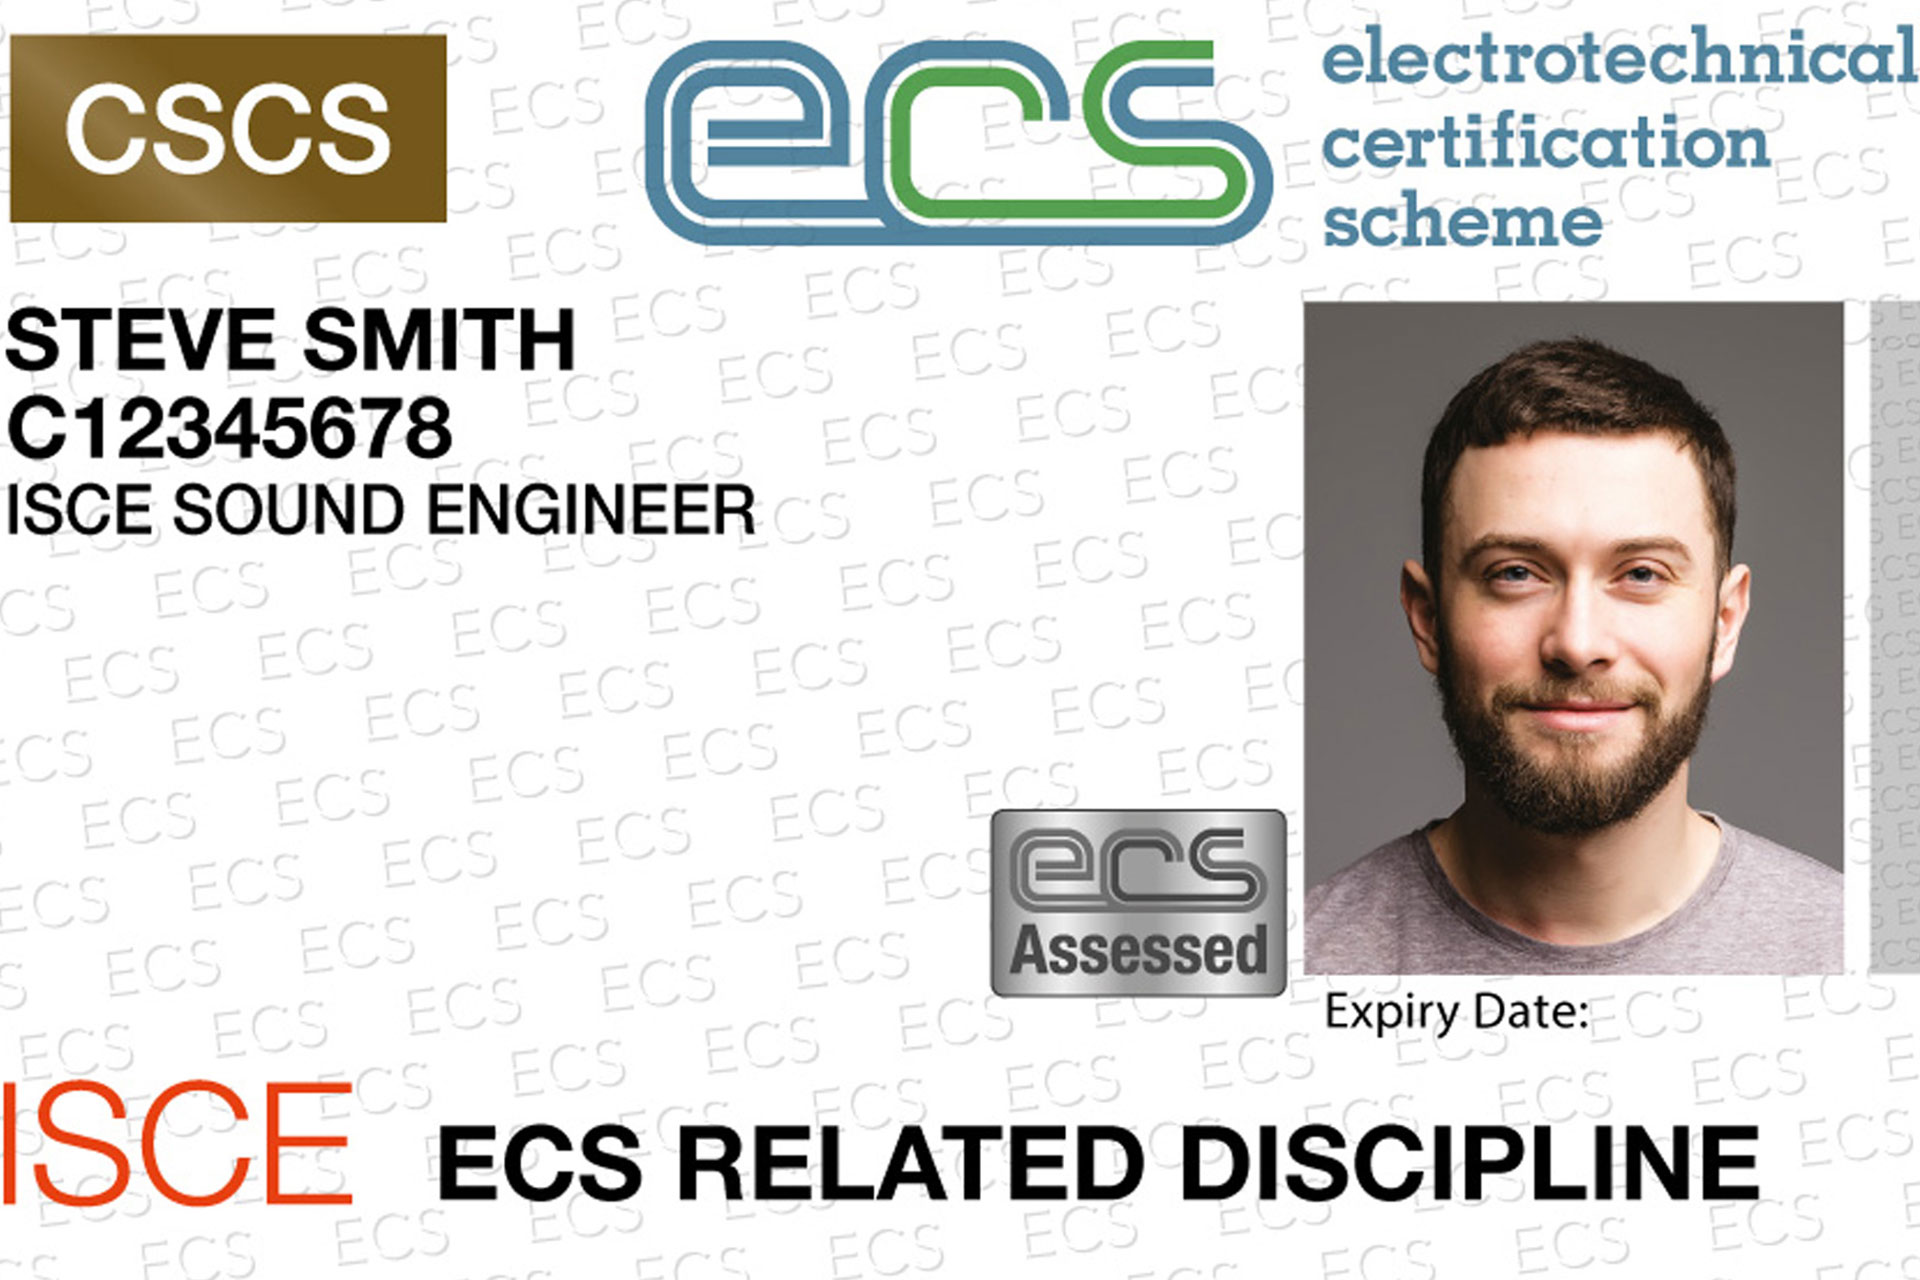 ISCE announces very first Sound Engineer ECS Card Health & Safety Assessment event